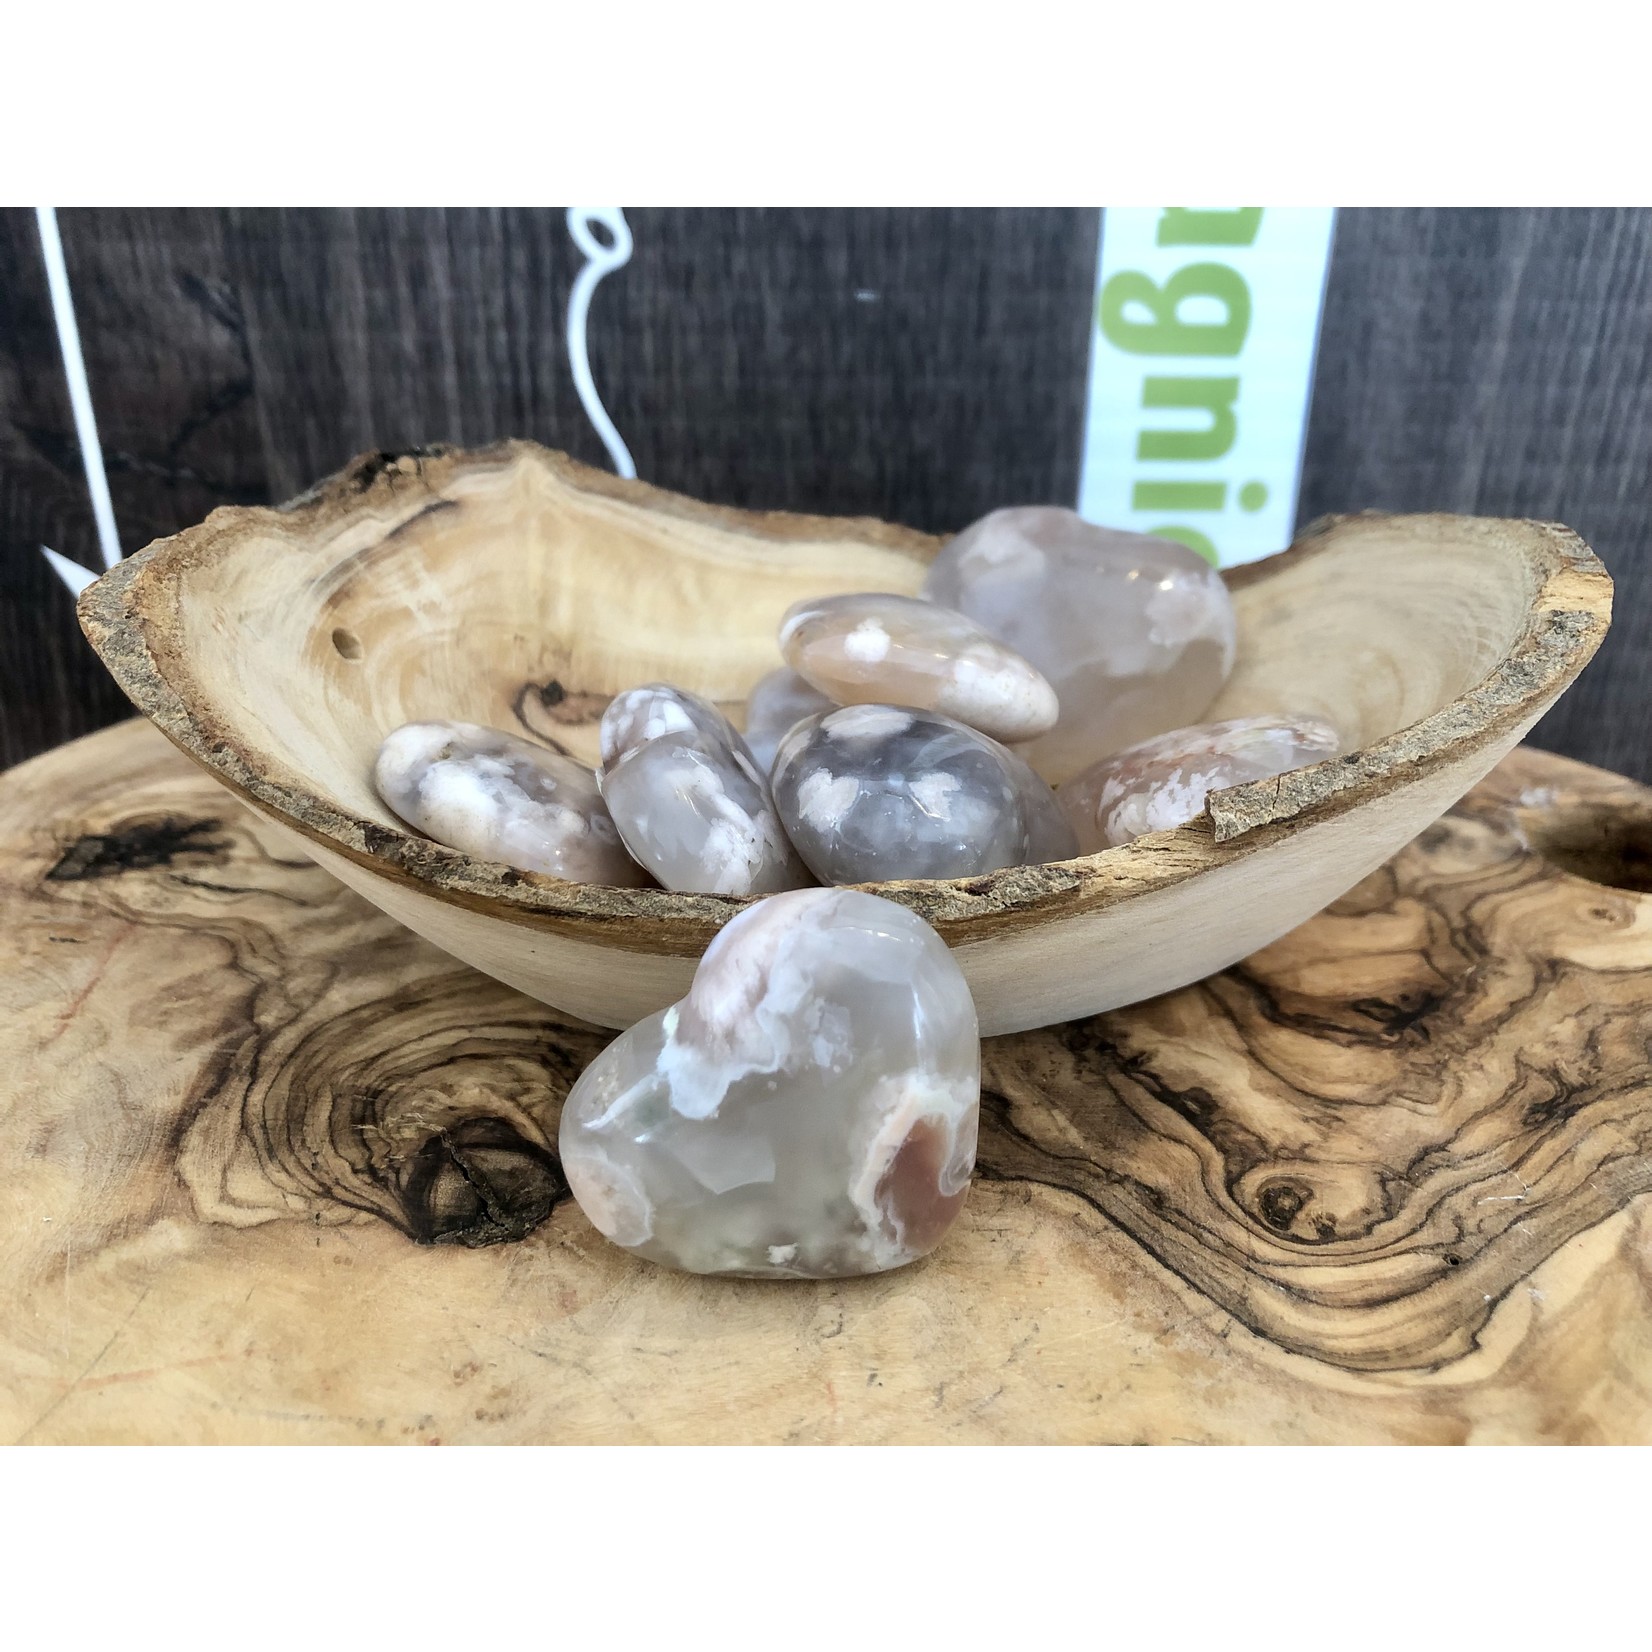 beautiful flower agate heart, natural agate heart, helps to calm down, so it acts against stress anxiety depression